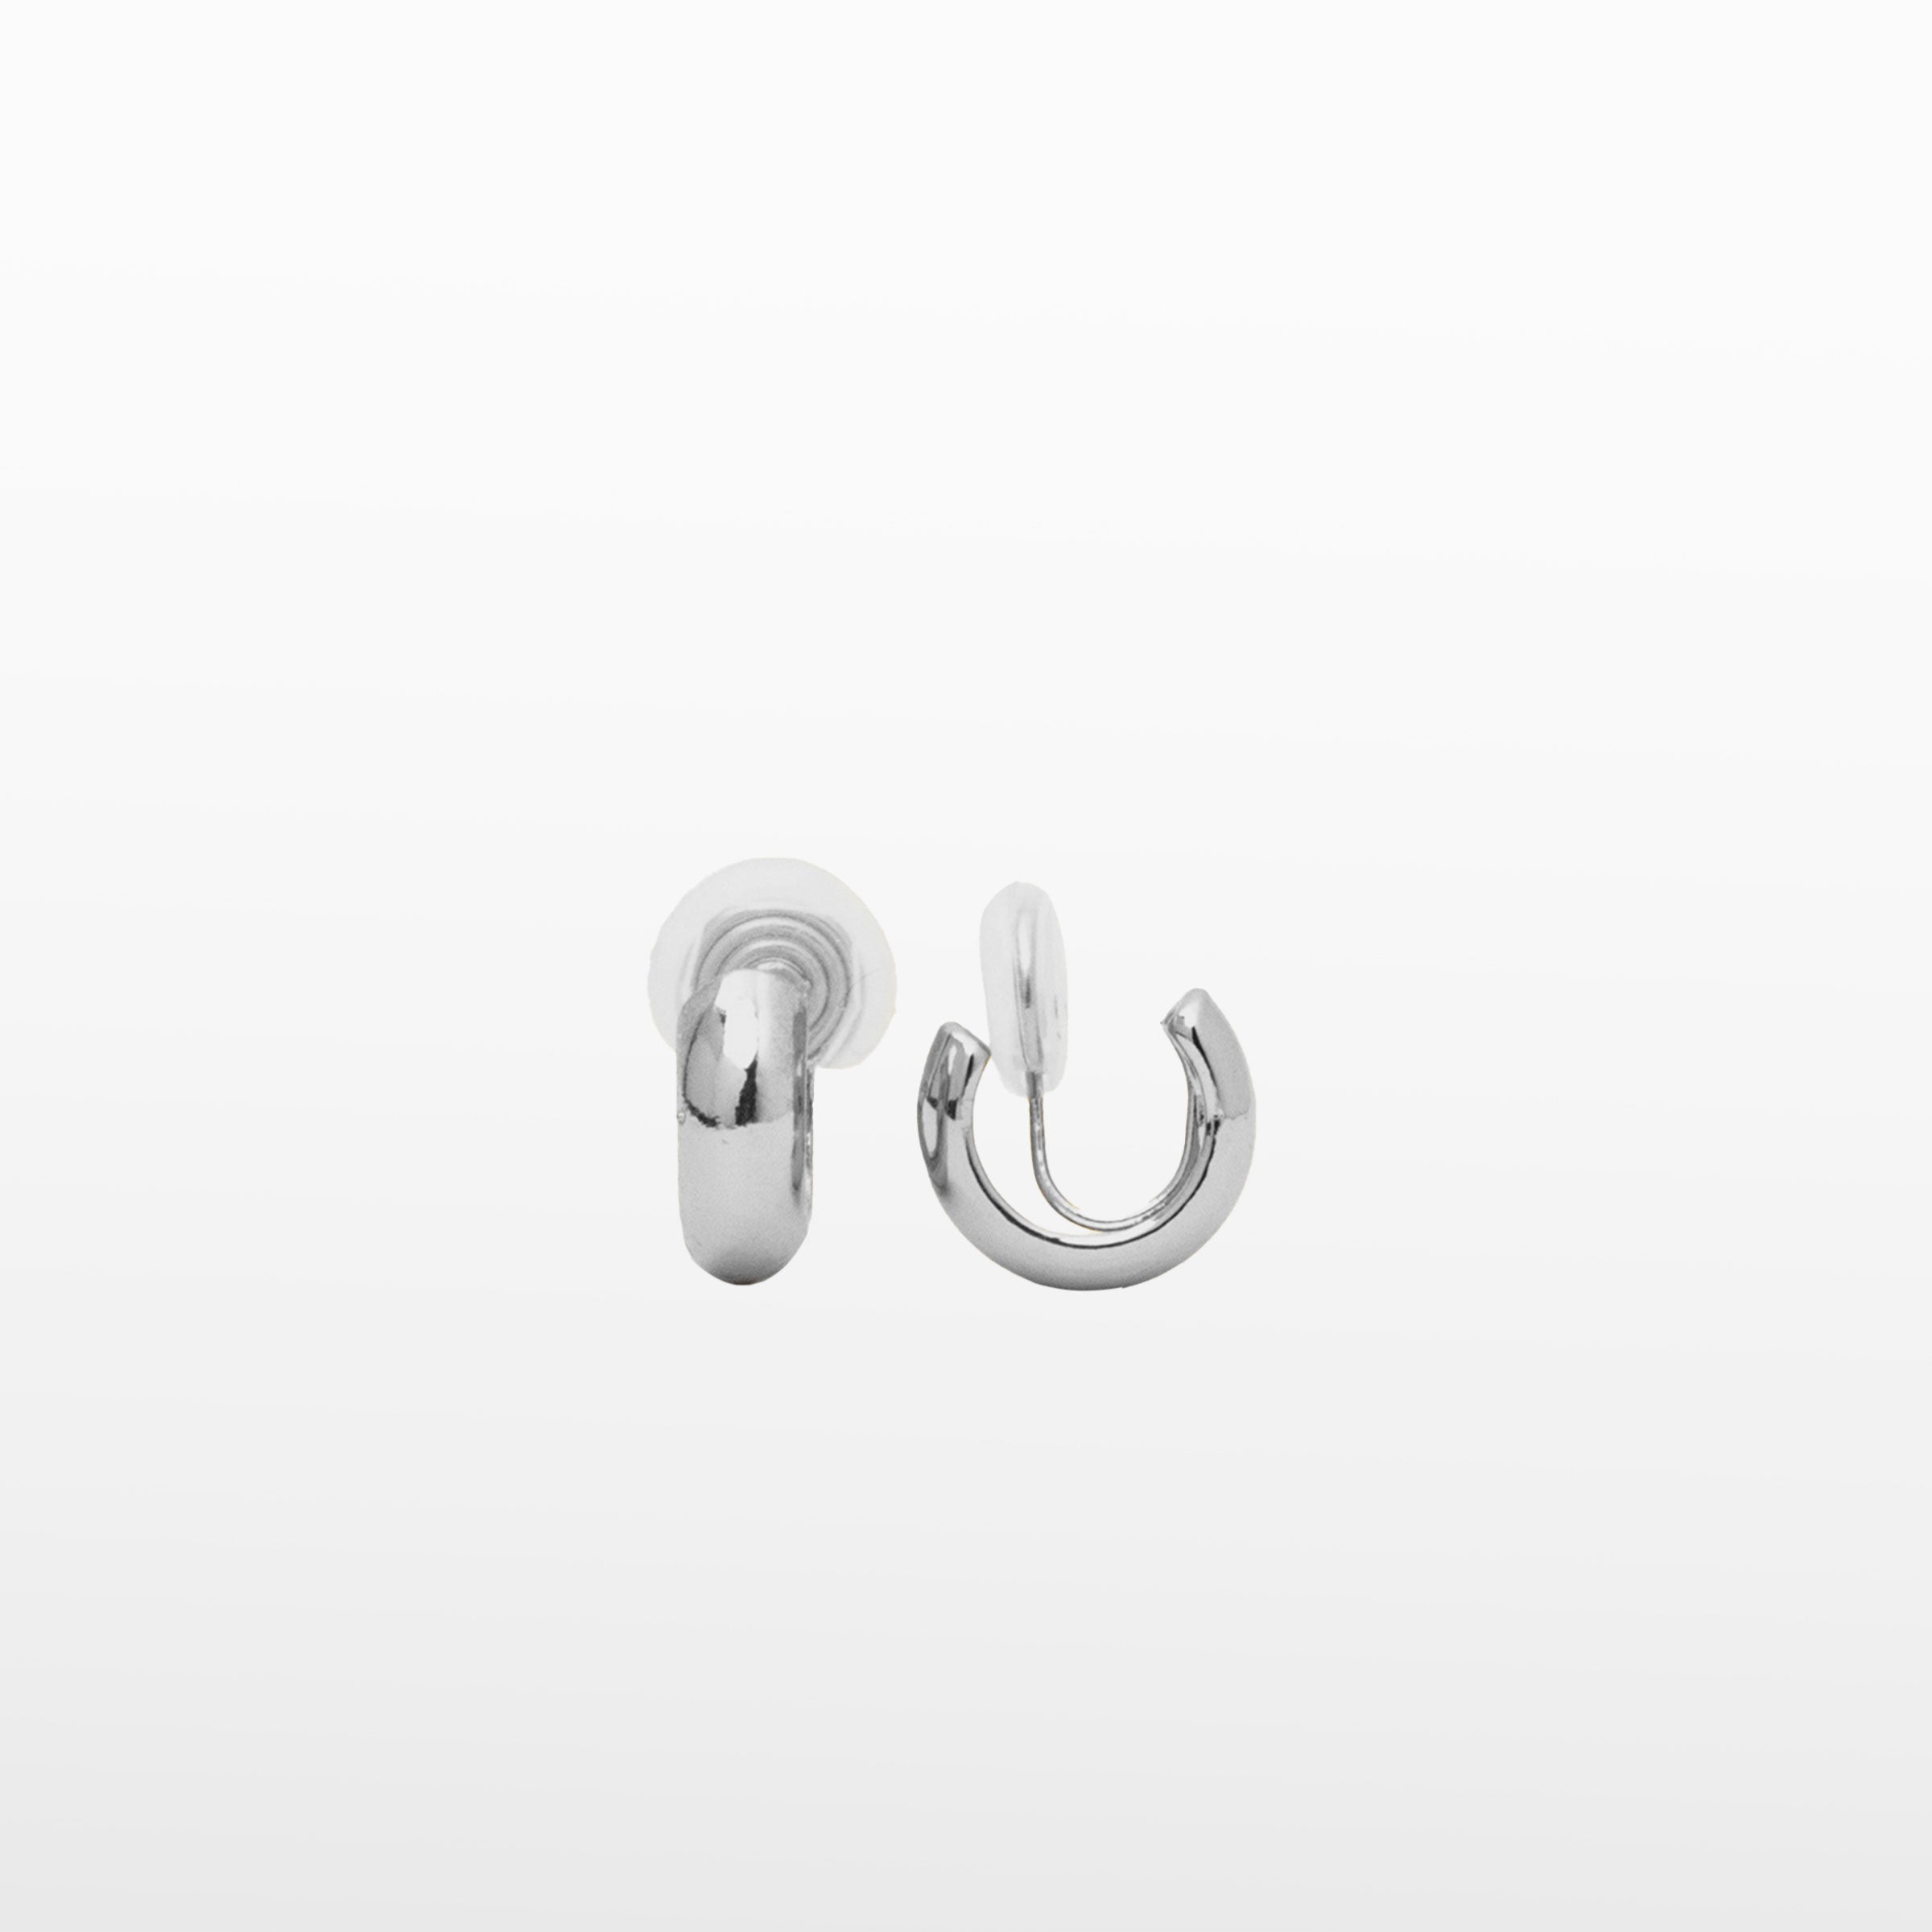 Image of the Small Hoop Clip-On Earrings in Silver offer medium-secure hold for up to 24 hours. Crafted from copper alloy, they feature a mosquito coil closure and can be adjusted to fit various ear types. One pair per order.